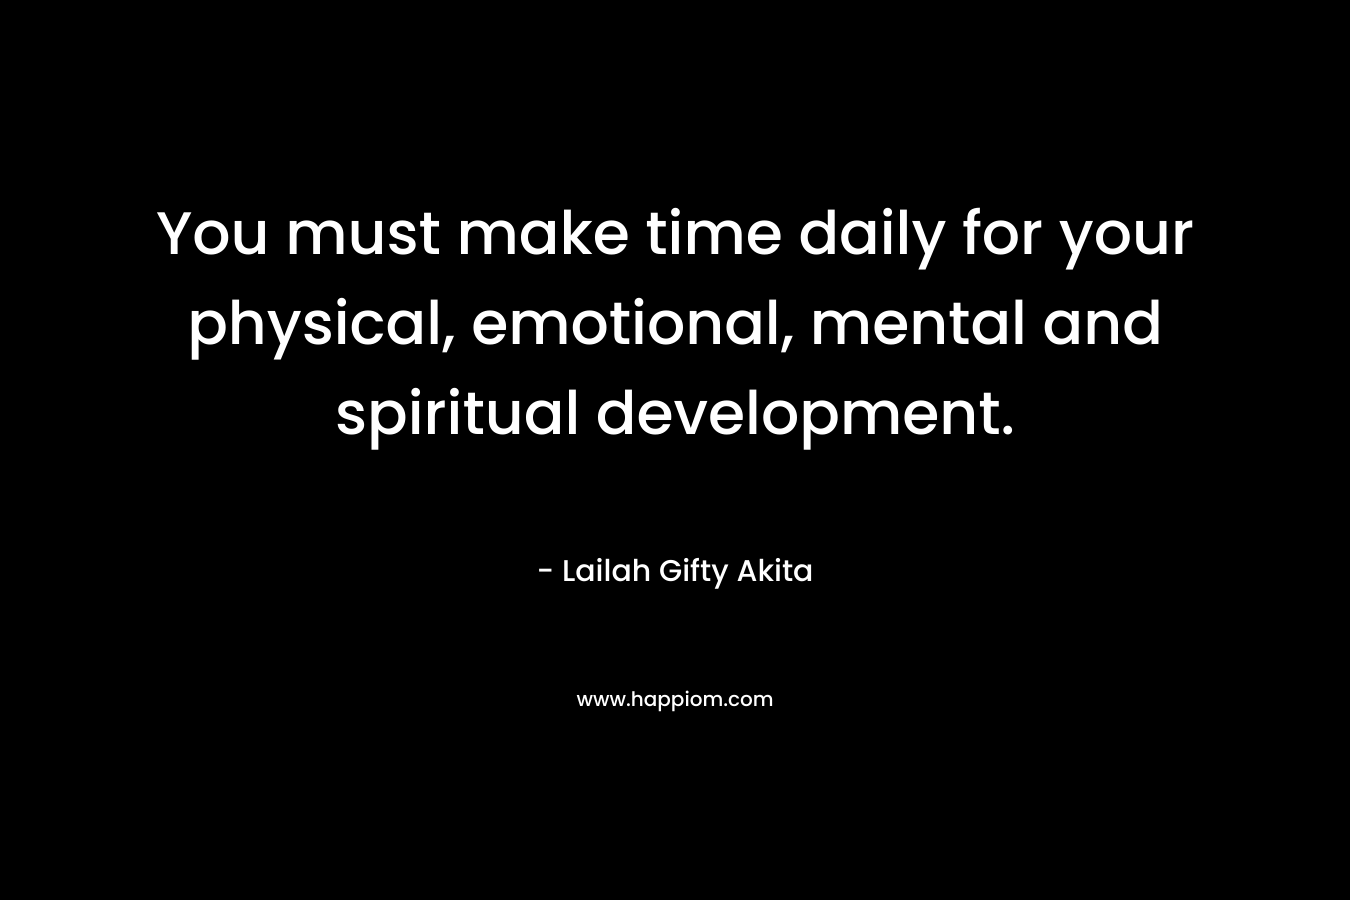 You must make time daily for your physical, emotional, mental and spiritual development.